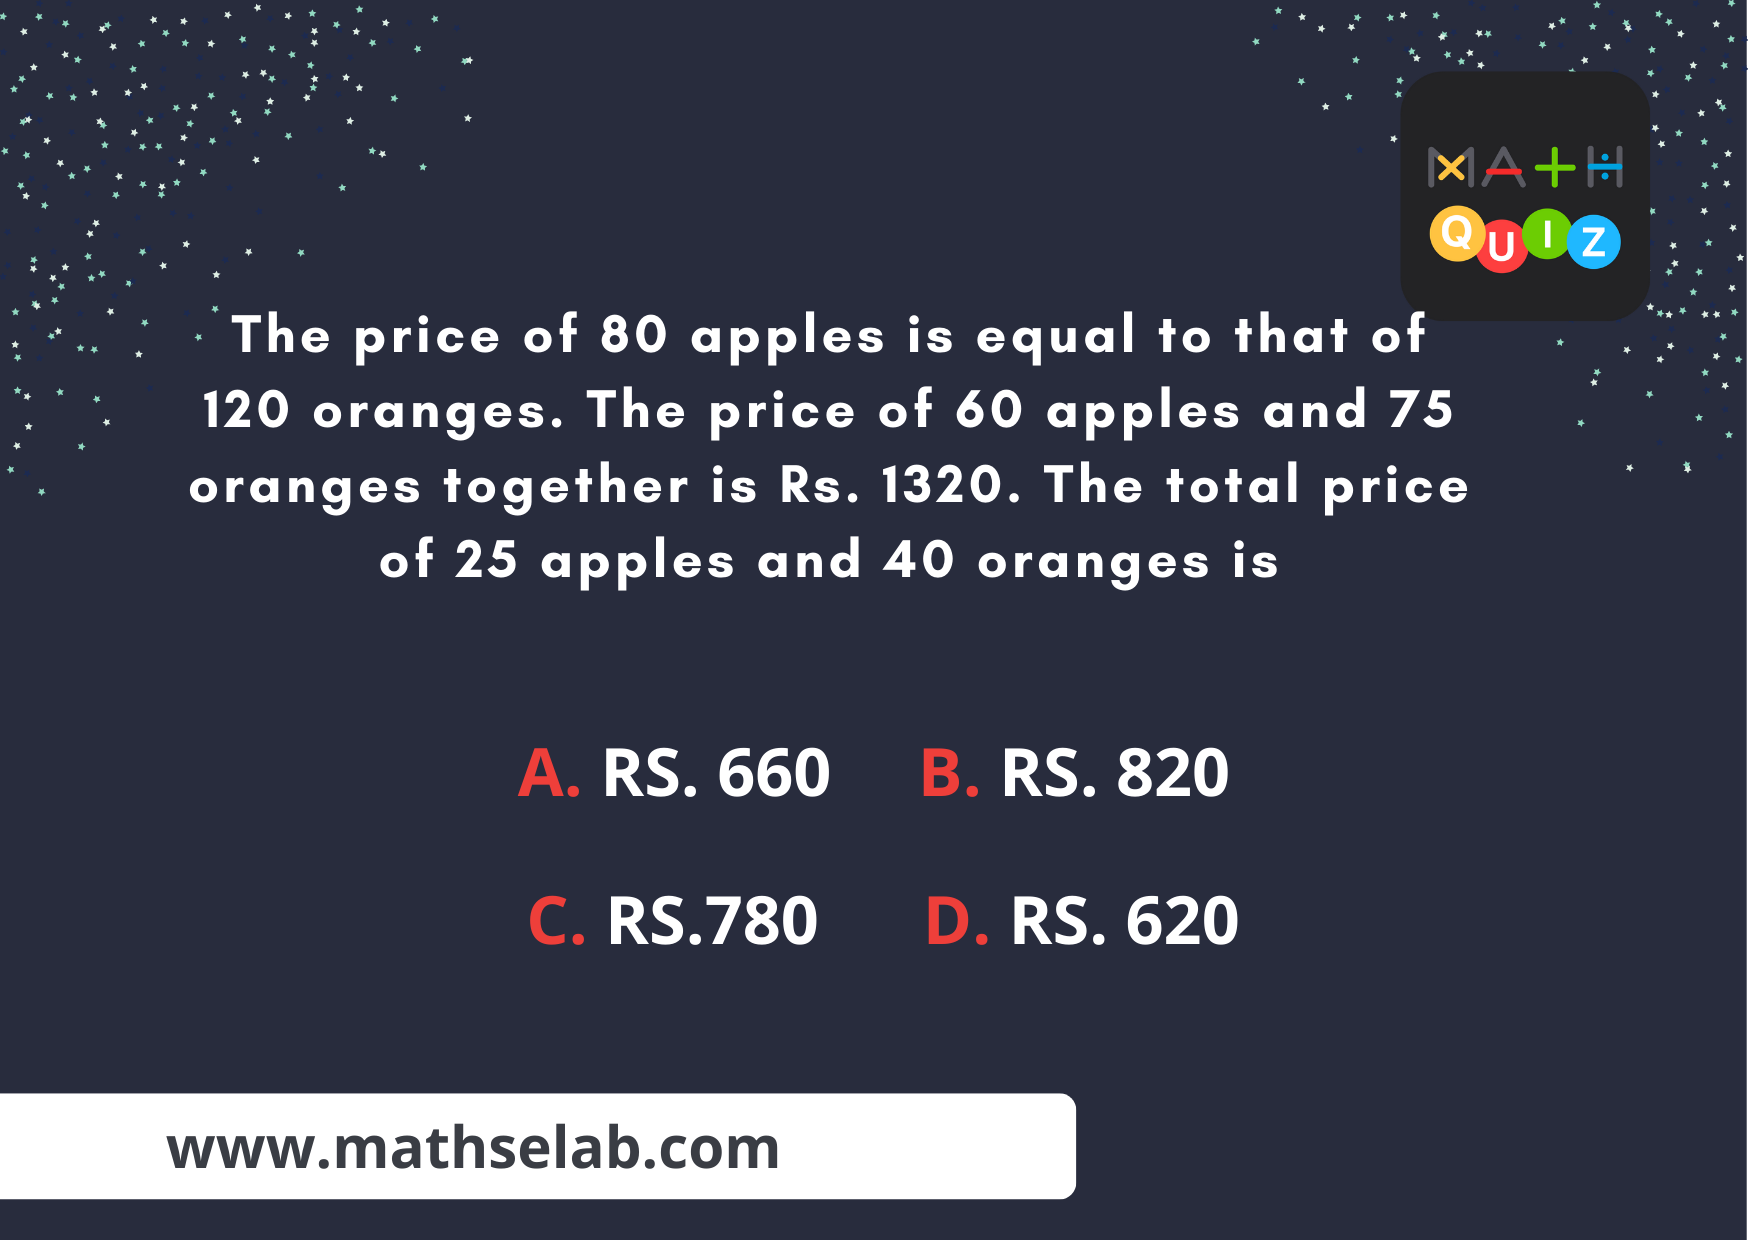 The price of 80 apples is equal to that of 120 oranges. The price of 60 apples and 75 oranges together is Rs. 1320. The total price of 25 apples and 40 oranges is - www.mathselab.com